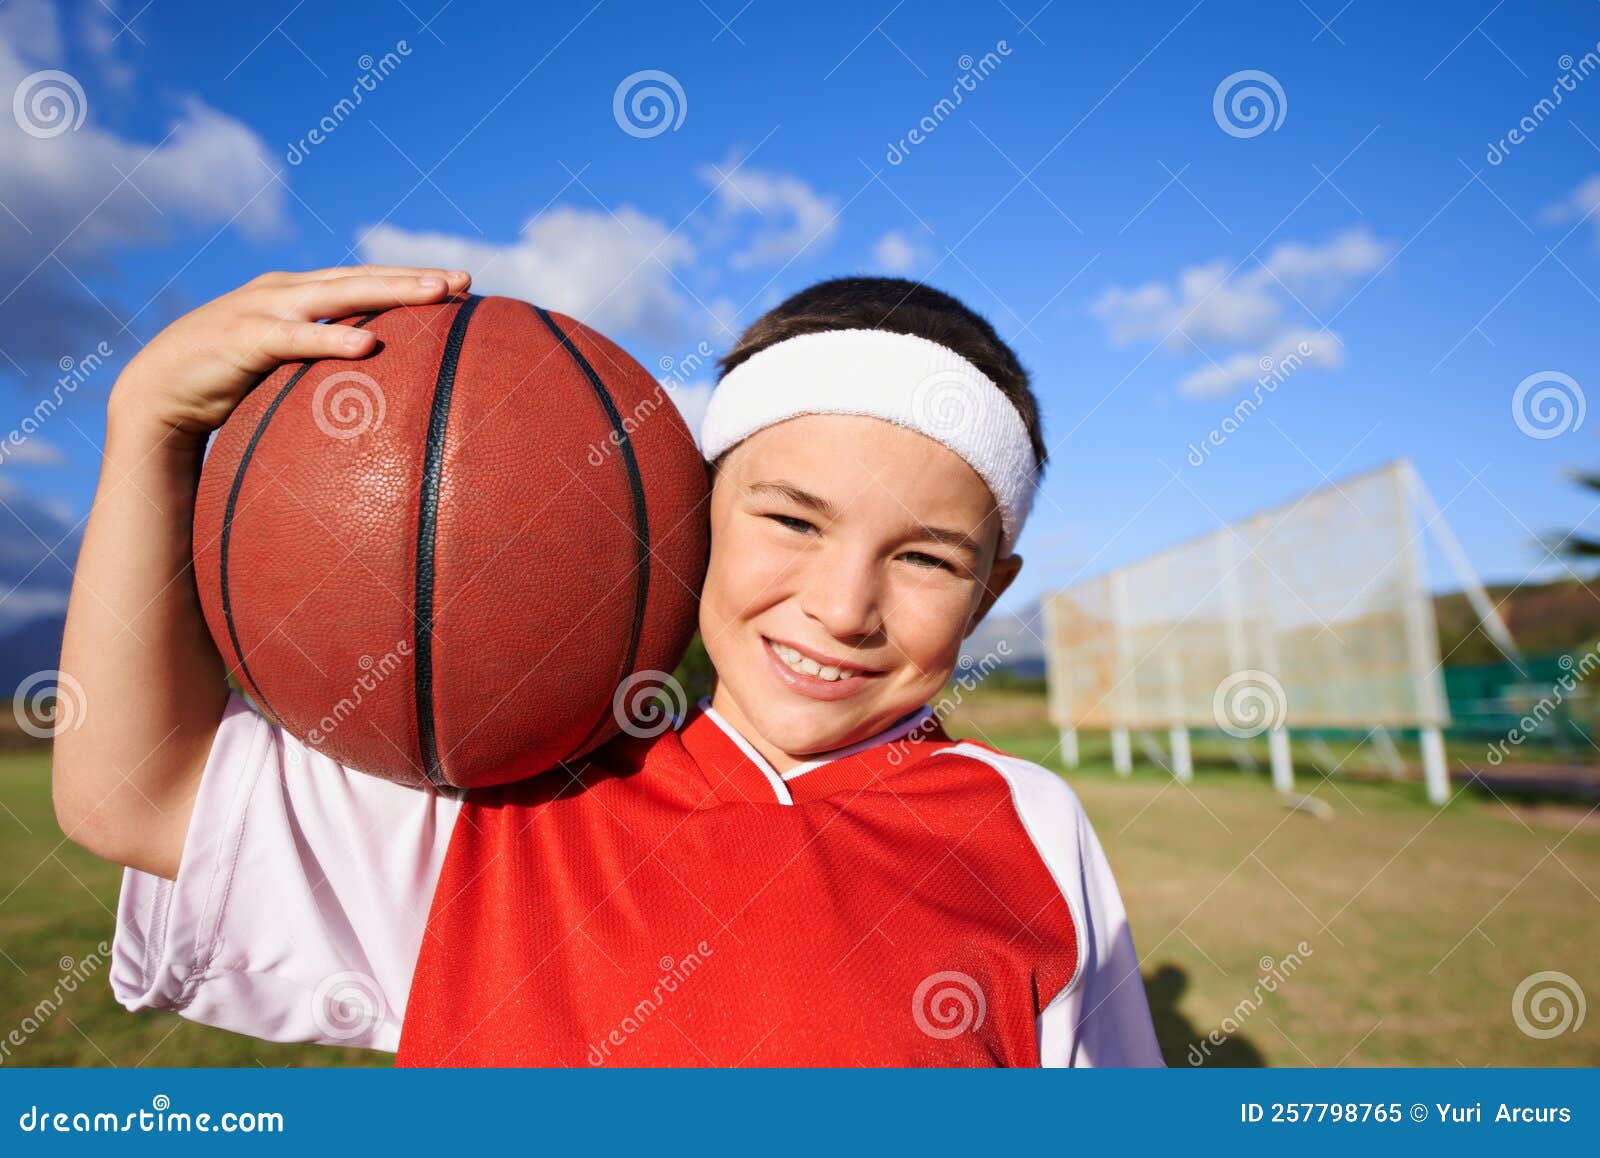 im gonna be the next wnba superstar. portrait of a young girl holding a basketball.